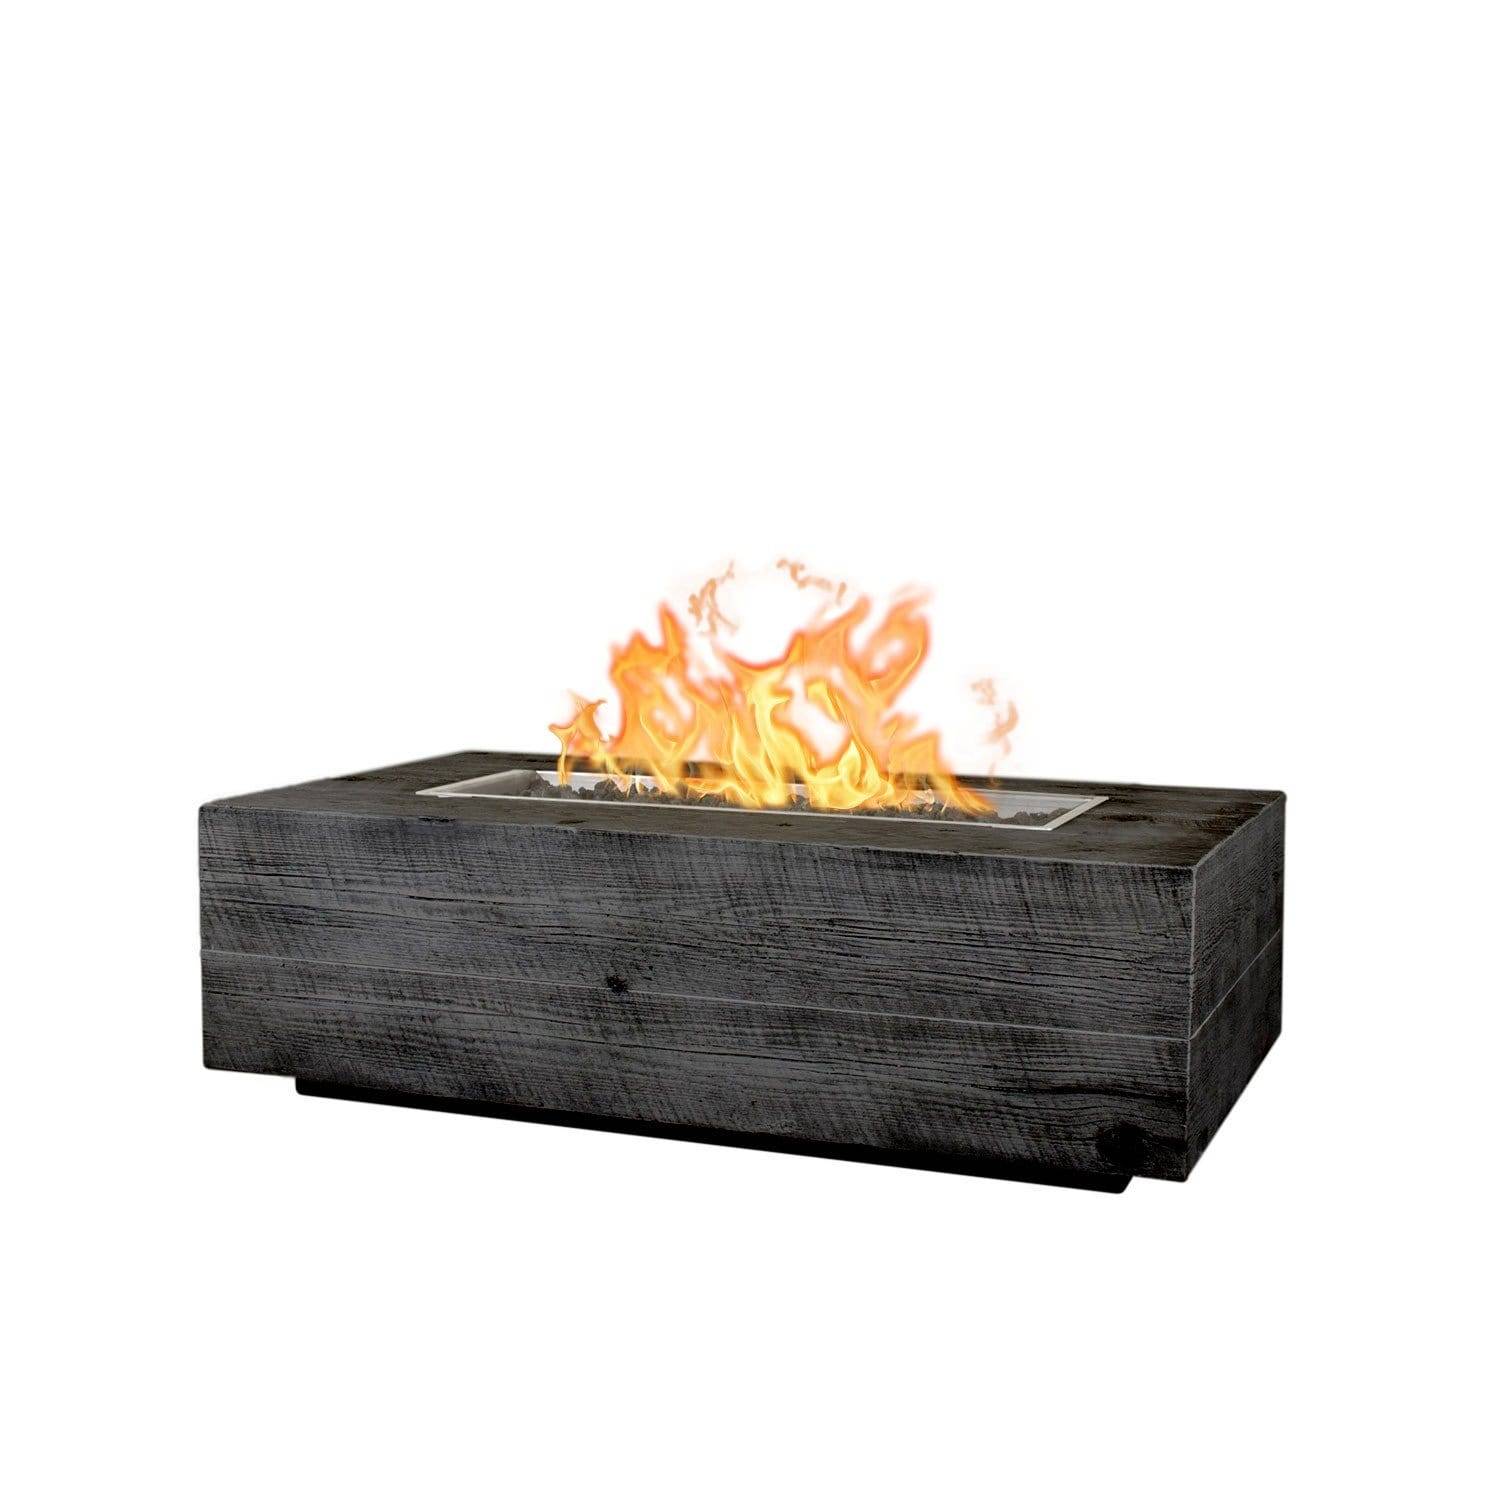 The Outdoor Plus Coronado Wood Grain Fire Pit in Ebony with flame on white background 1